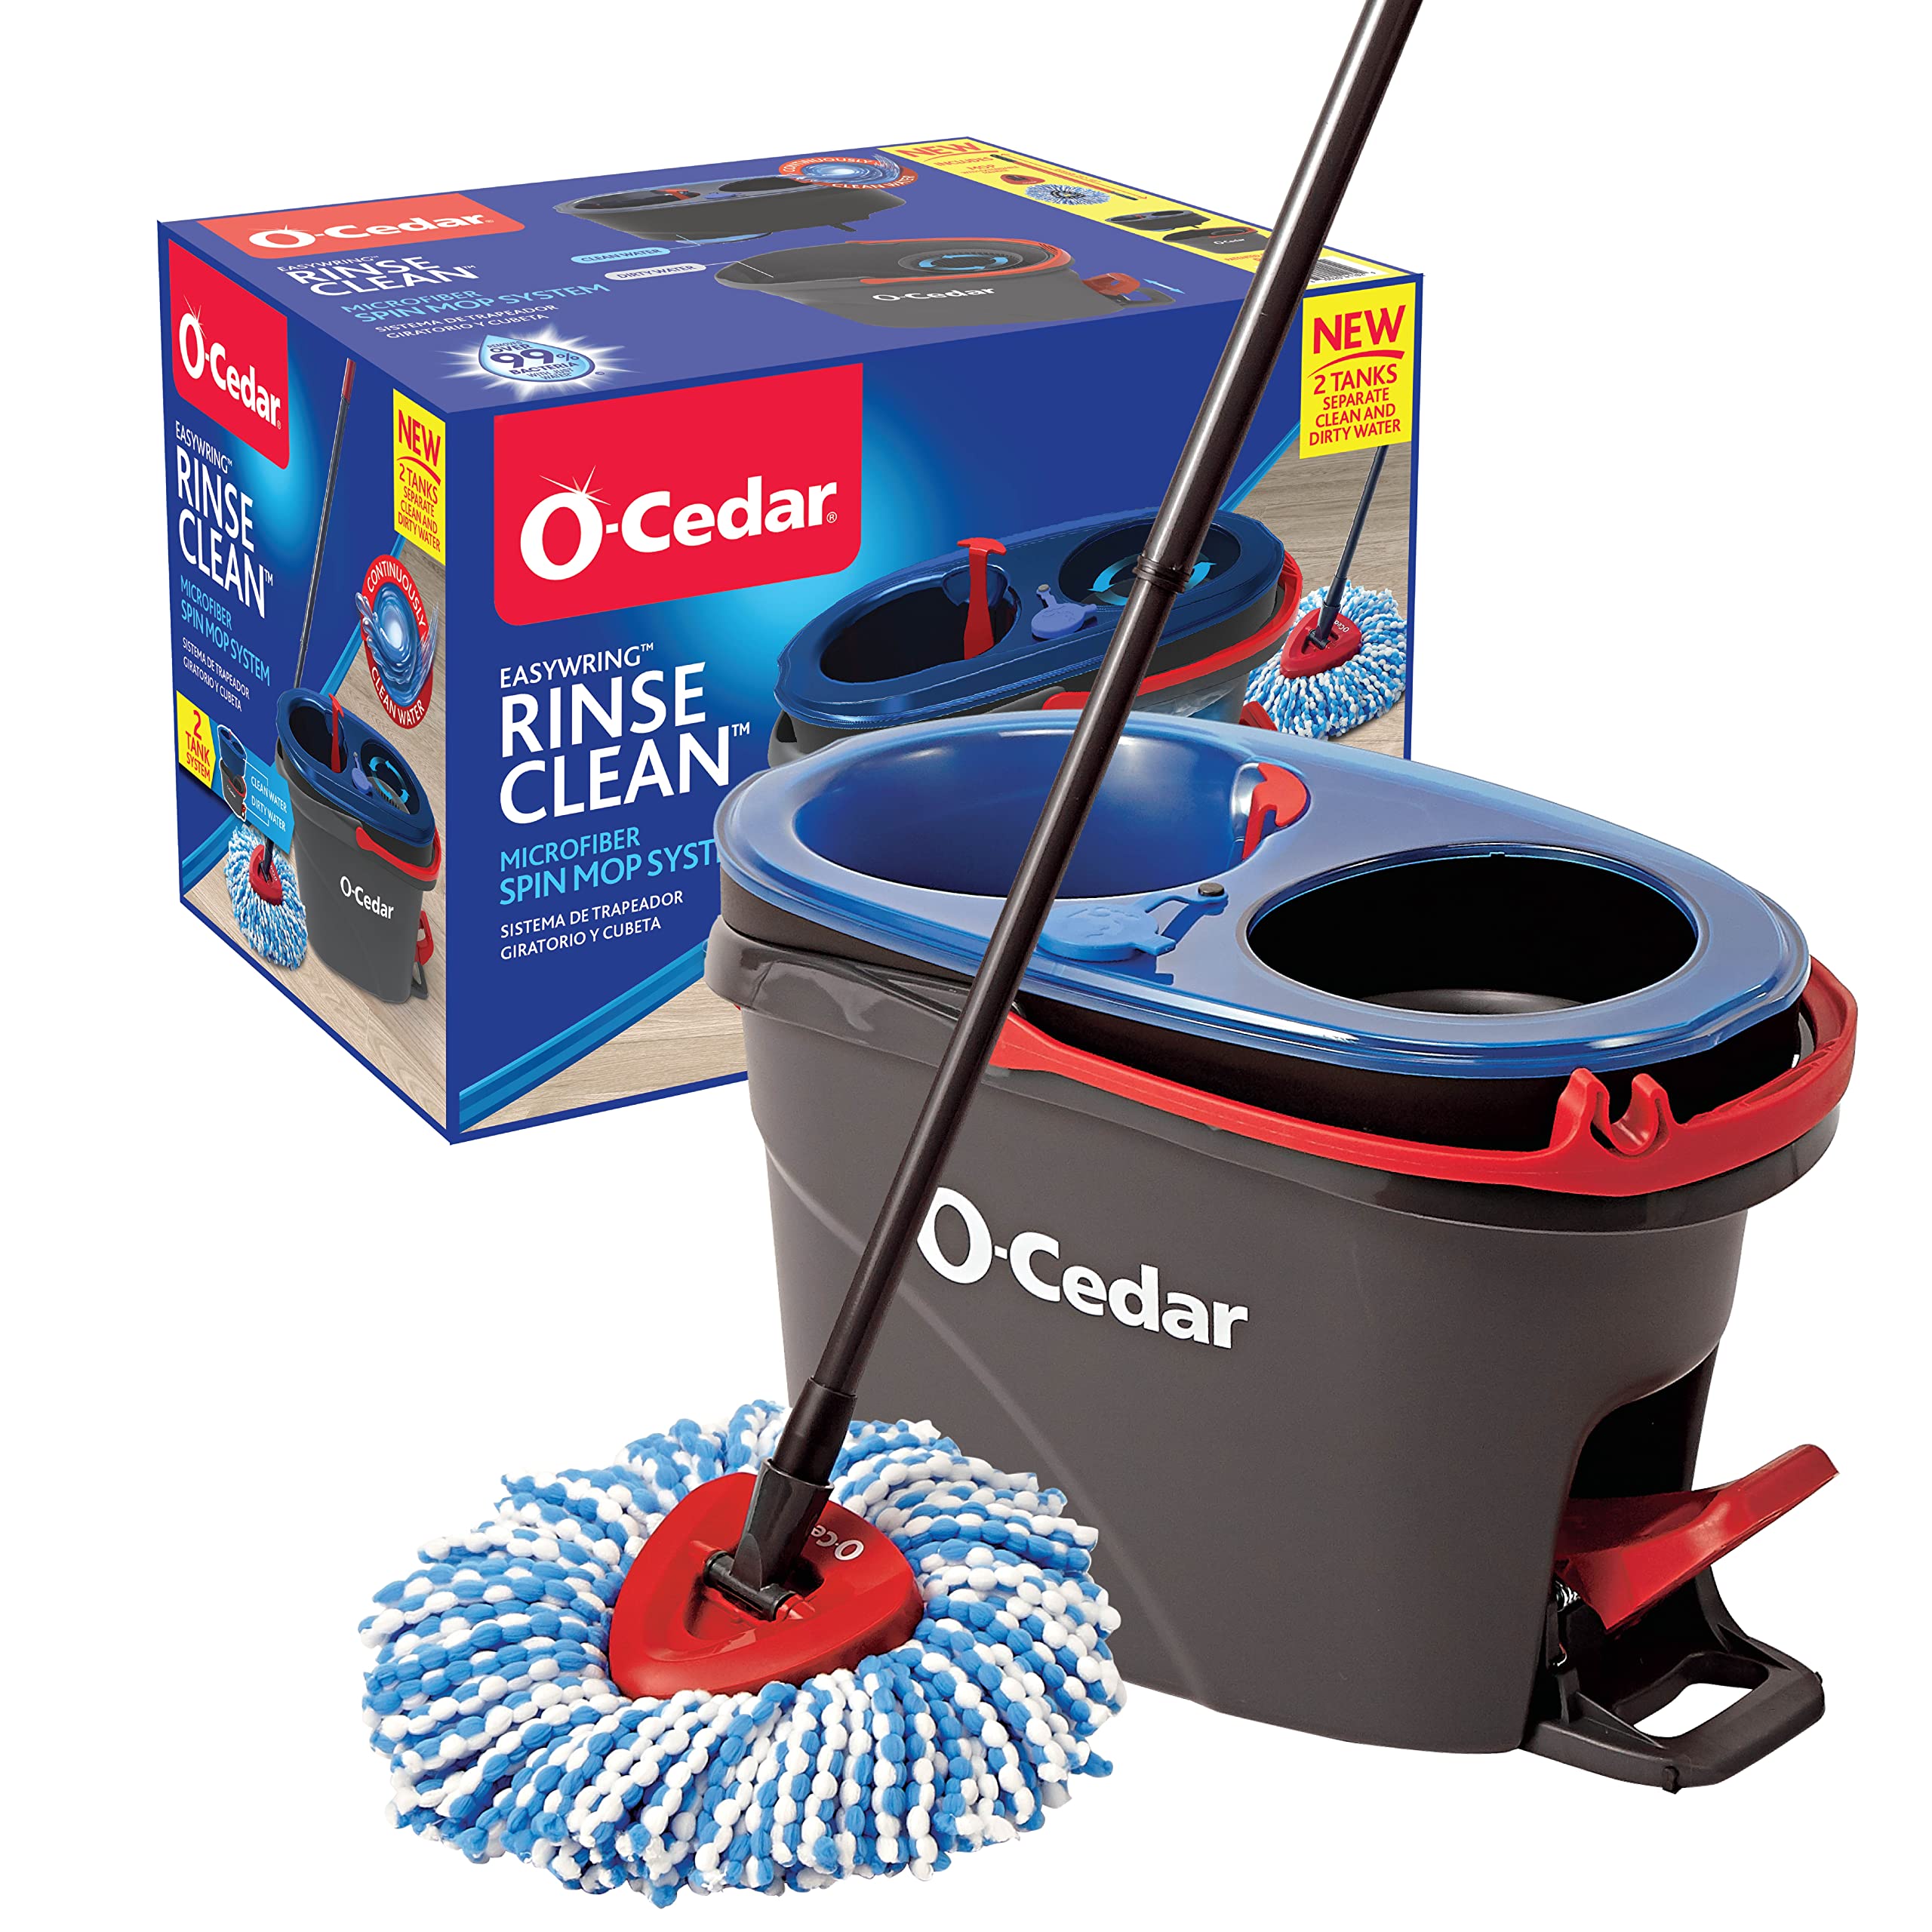 O-Cedar EasyWring RinseClean Microfiber Spin Mop & Bucket +  75 Sq Ft Reynolds Kitchens Cut-Rite Wax Paper Roll $37.50 & More + Free Shipping